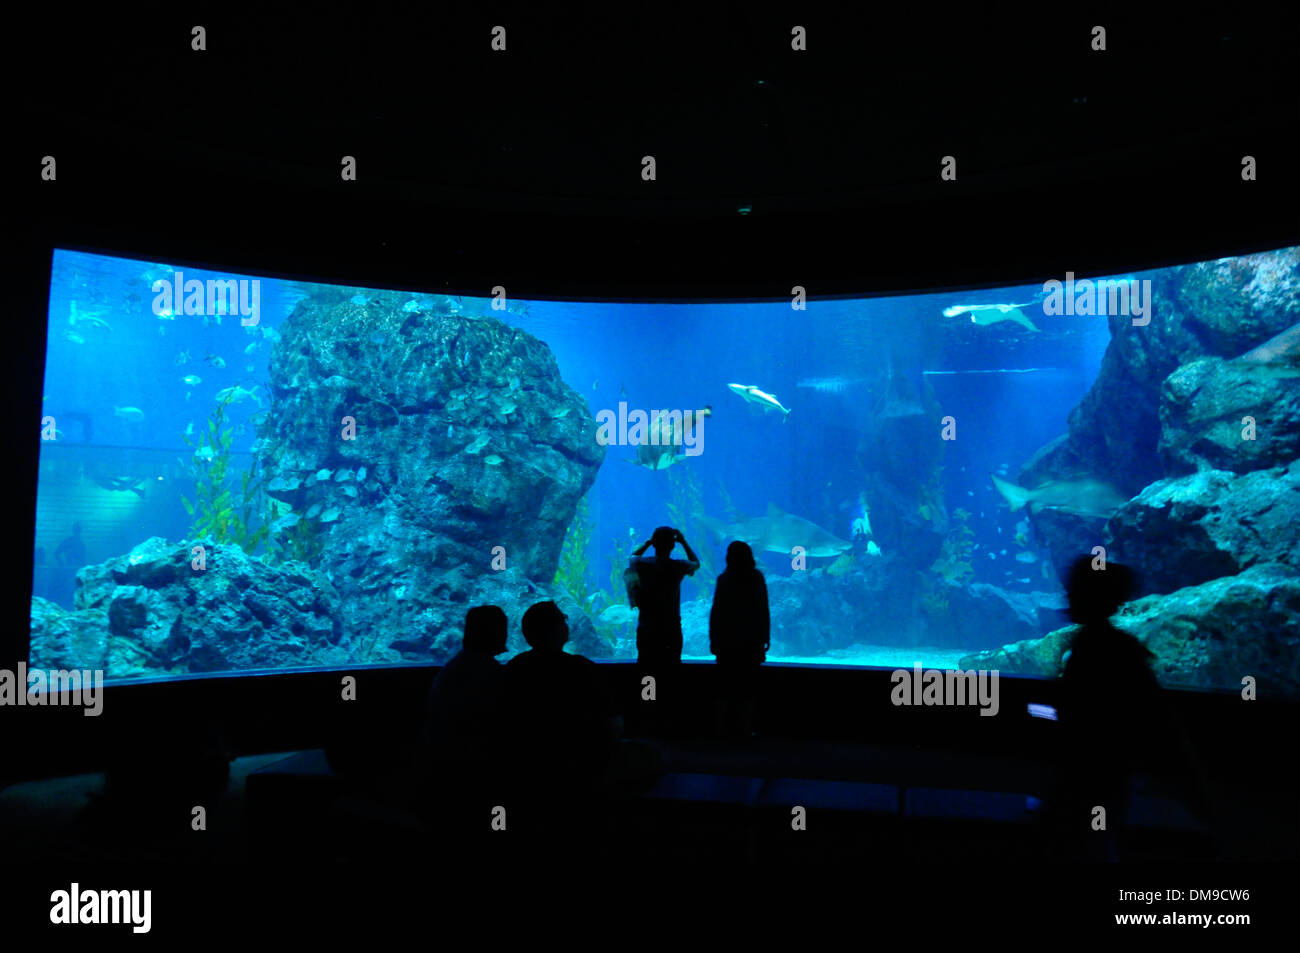 Man and woman taking picture of fishes and sharks in an aquarium Stock Photo